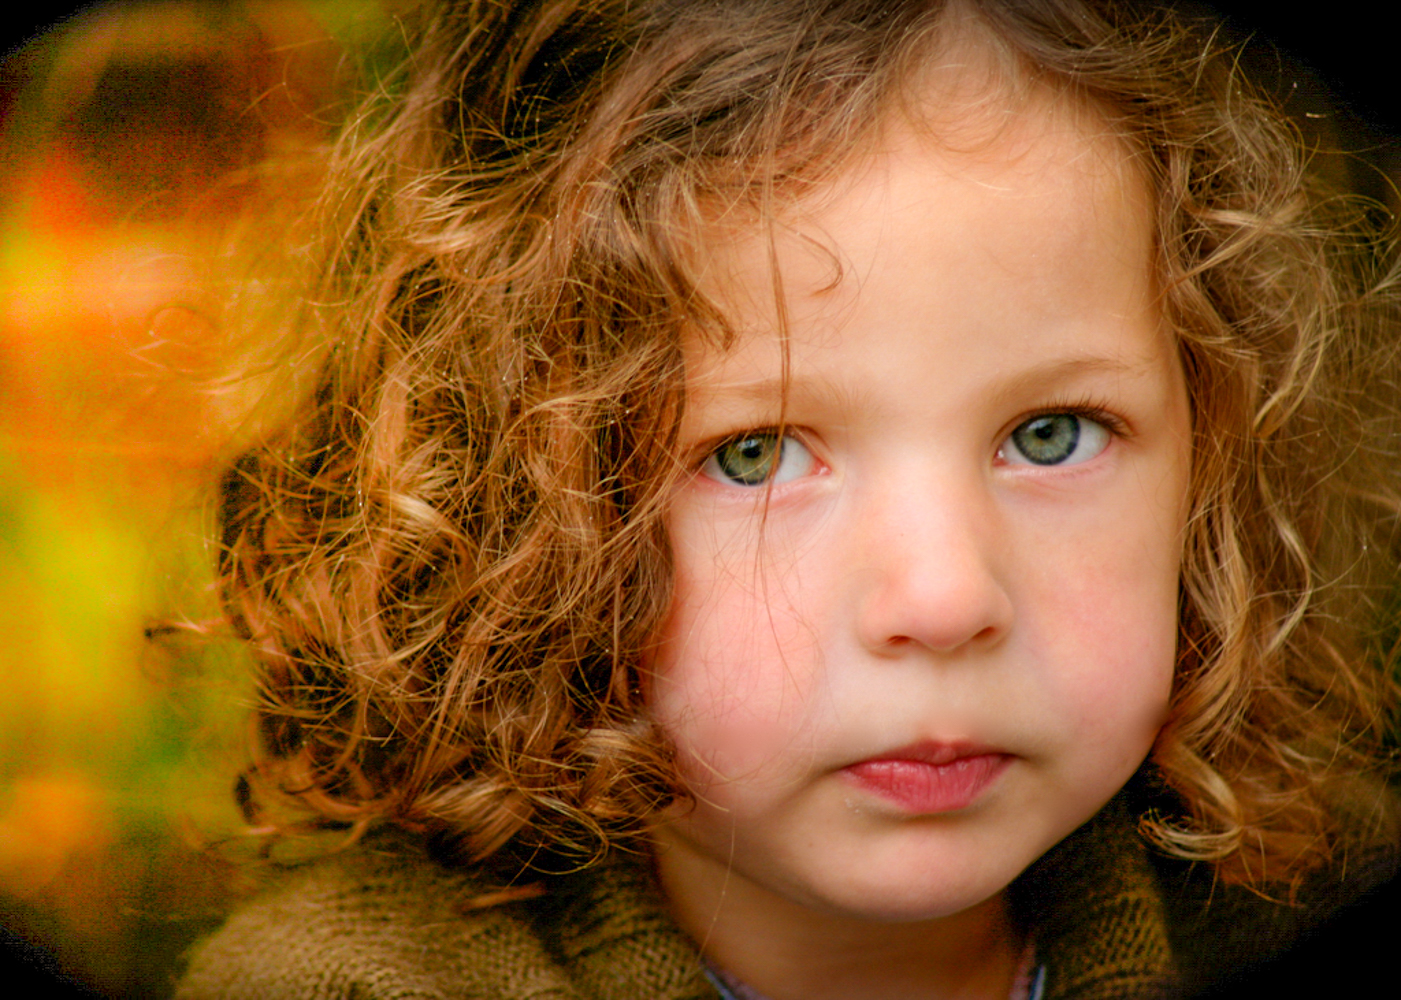 close up of young girl with green eyes and curly blond hair